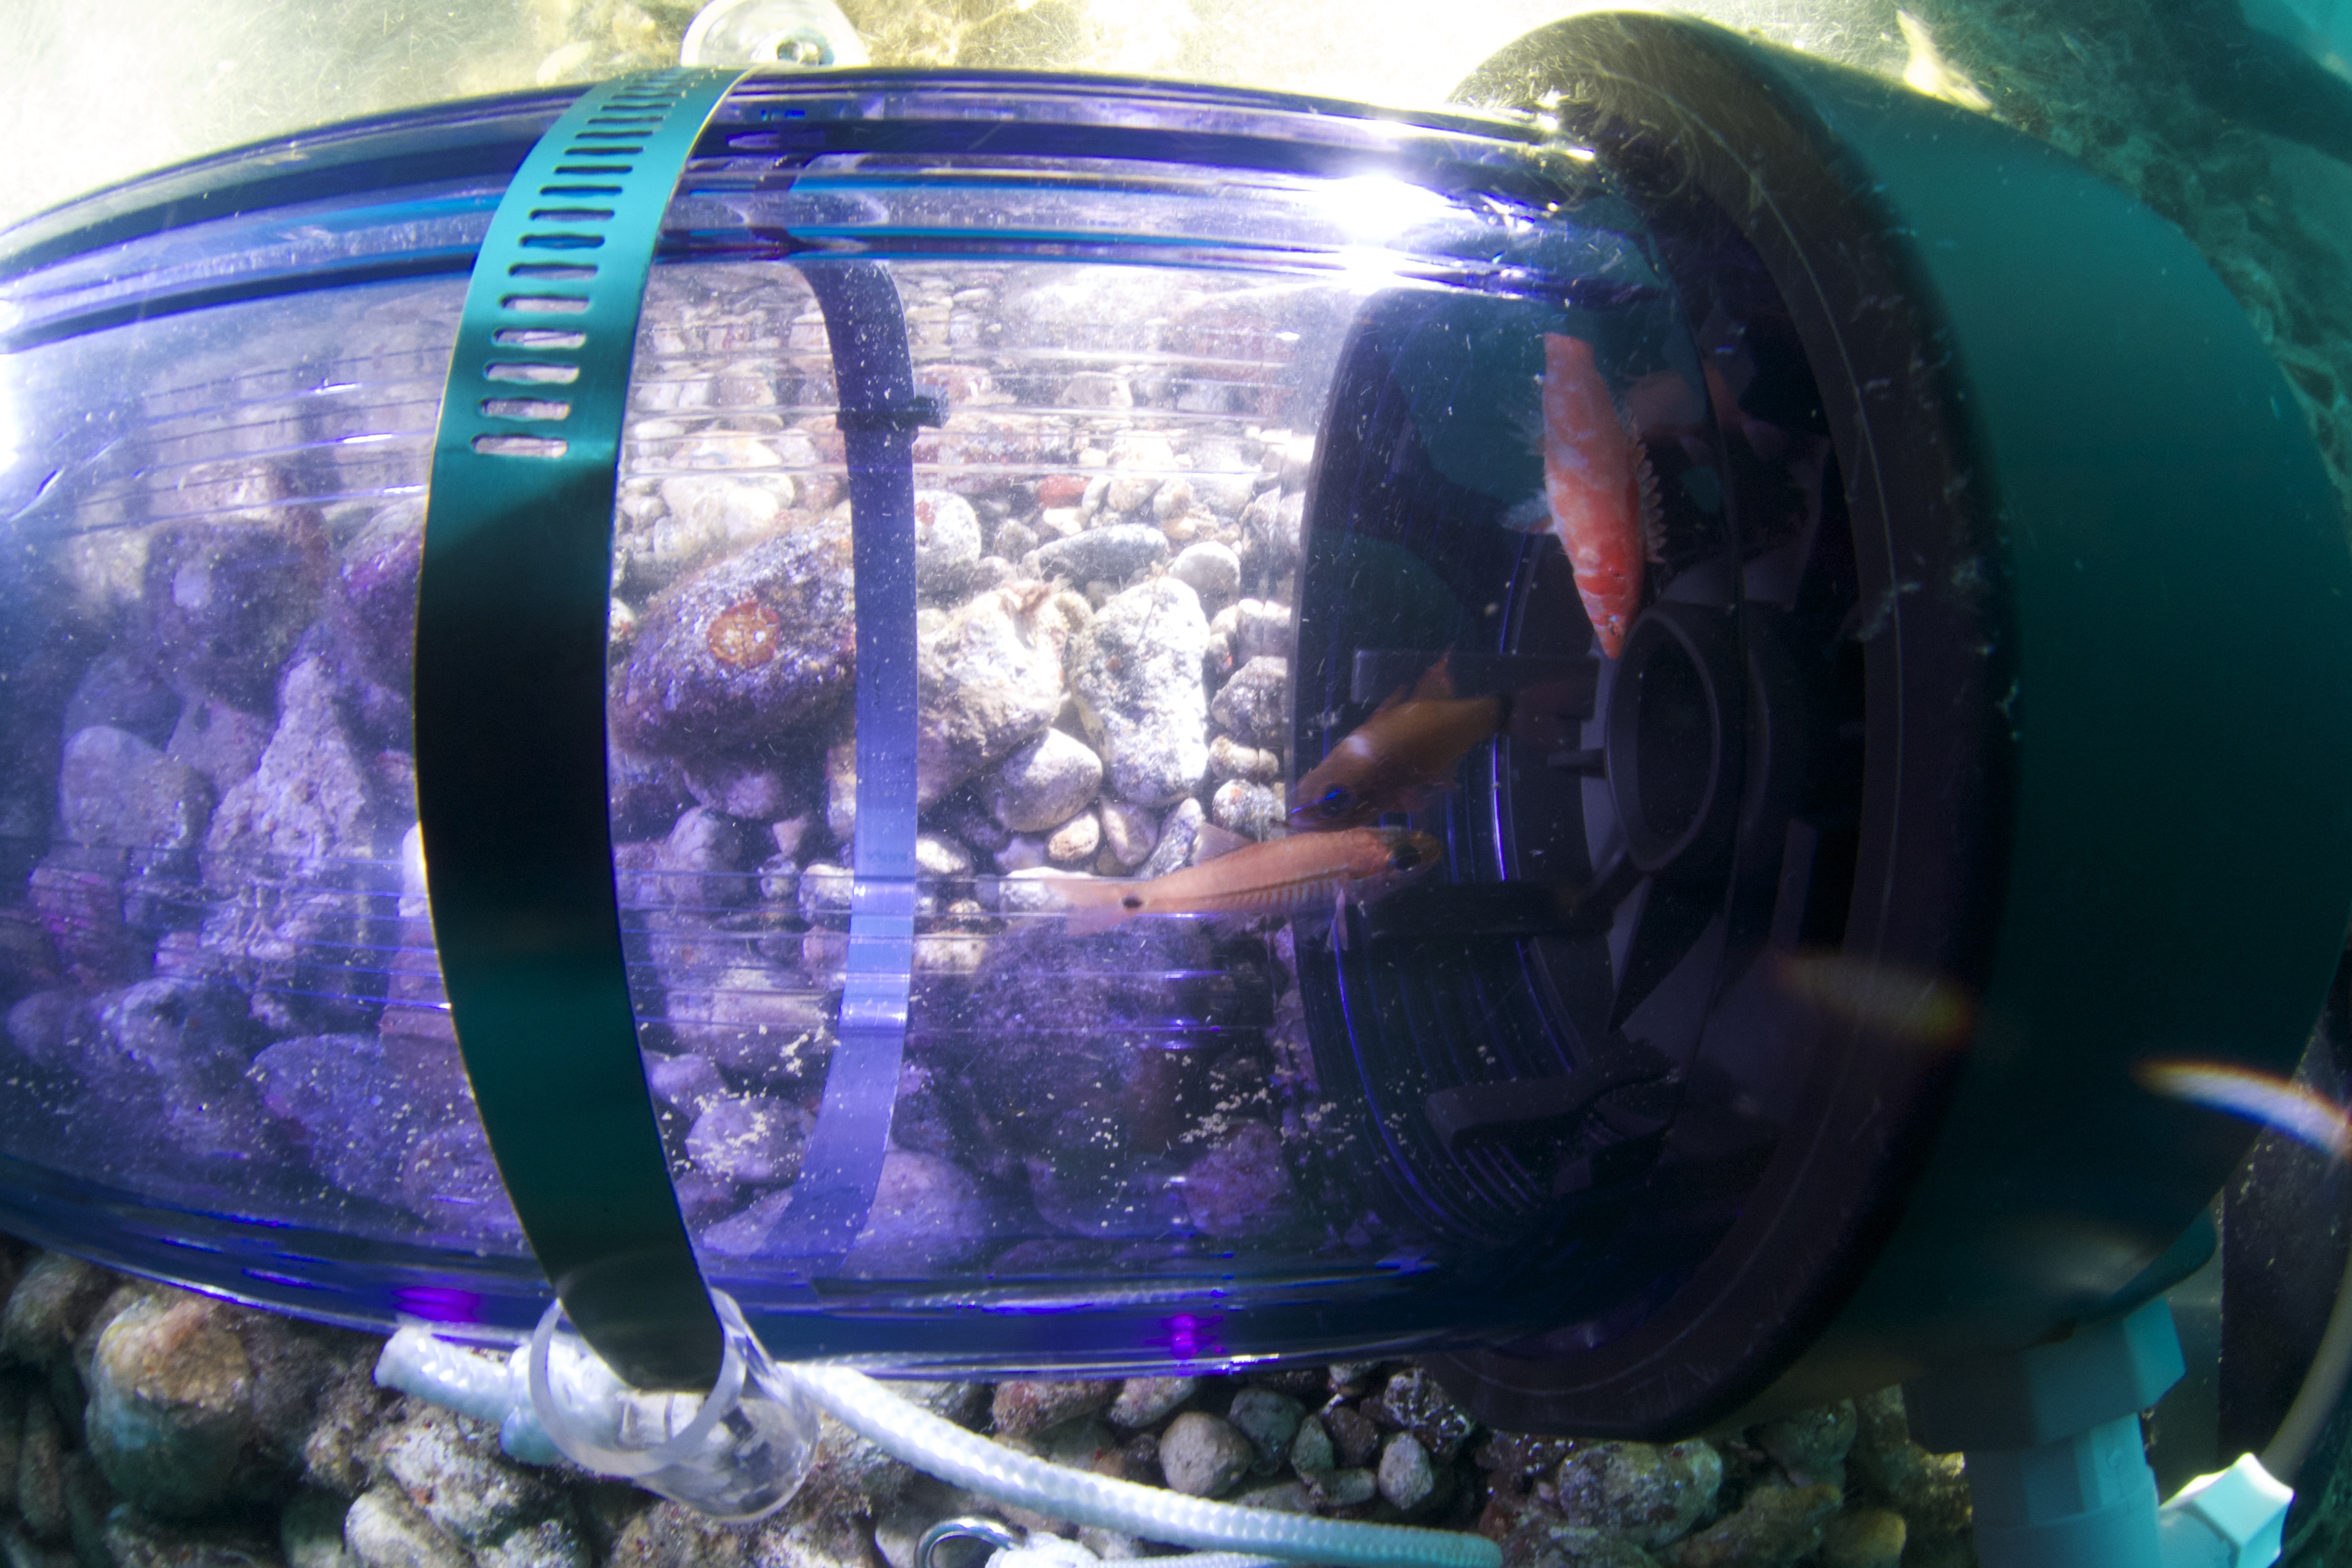 Fish in the portable decompression chamber.